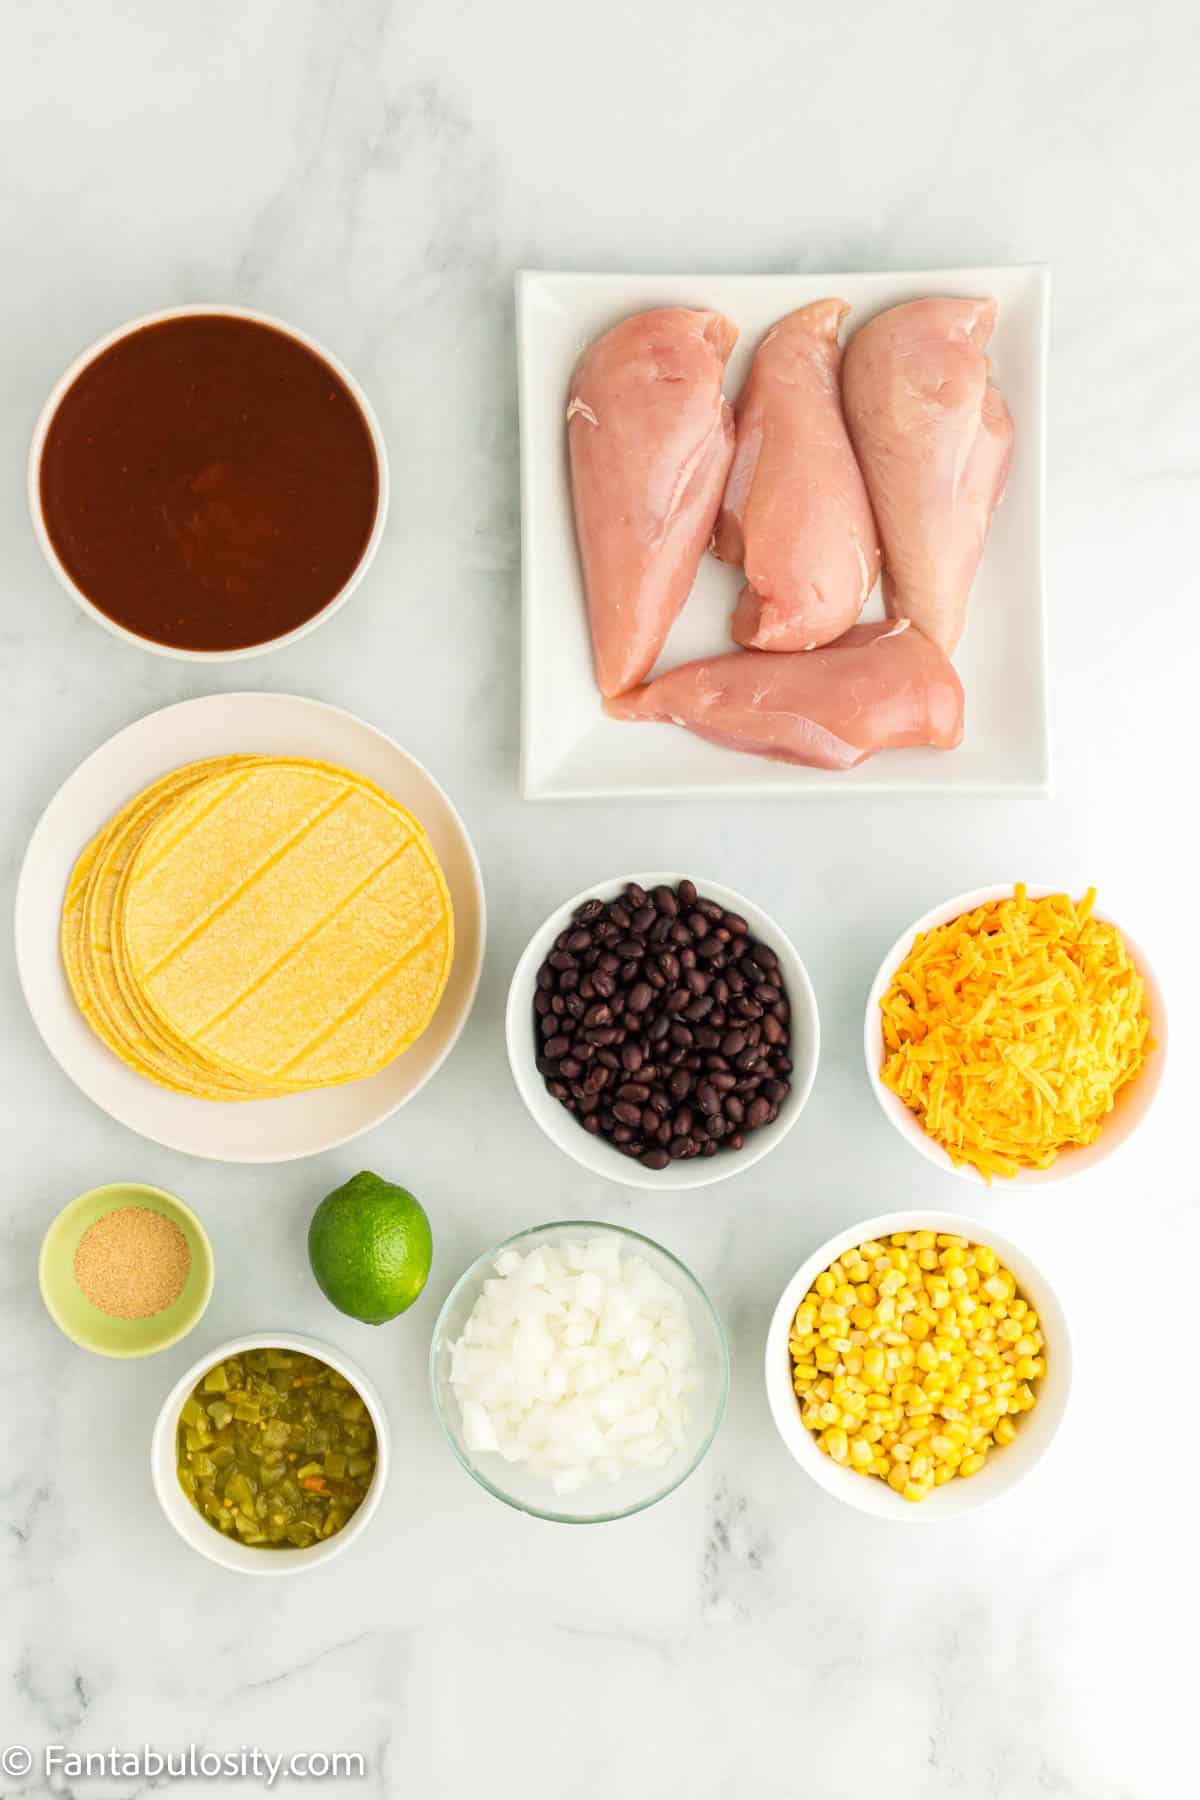 Corn tortillas, chicken breasts, enchilada sauce, corn, black beans, green chiles, onions, cheese and a lime are displayed on a white marble background